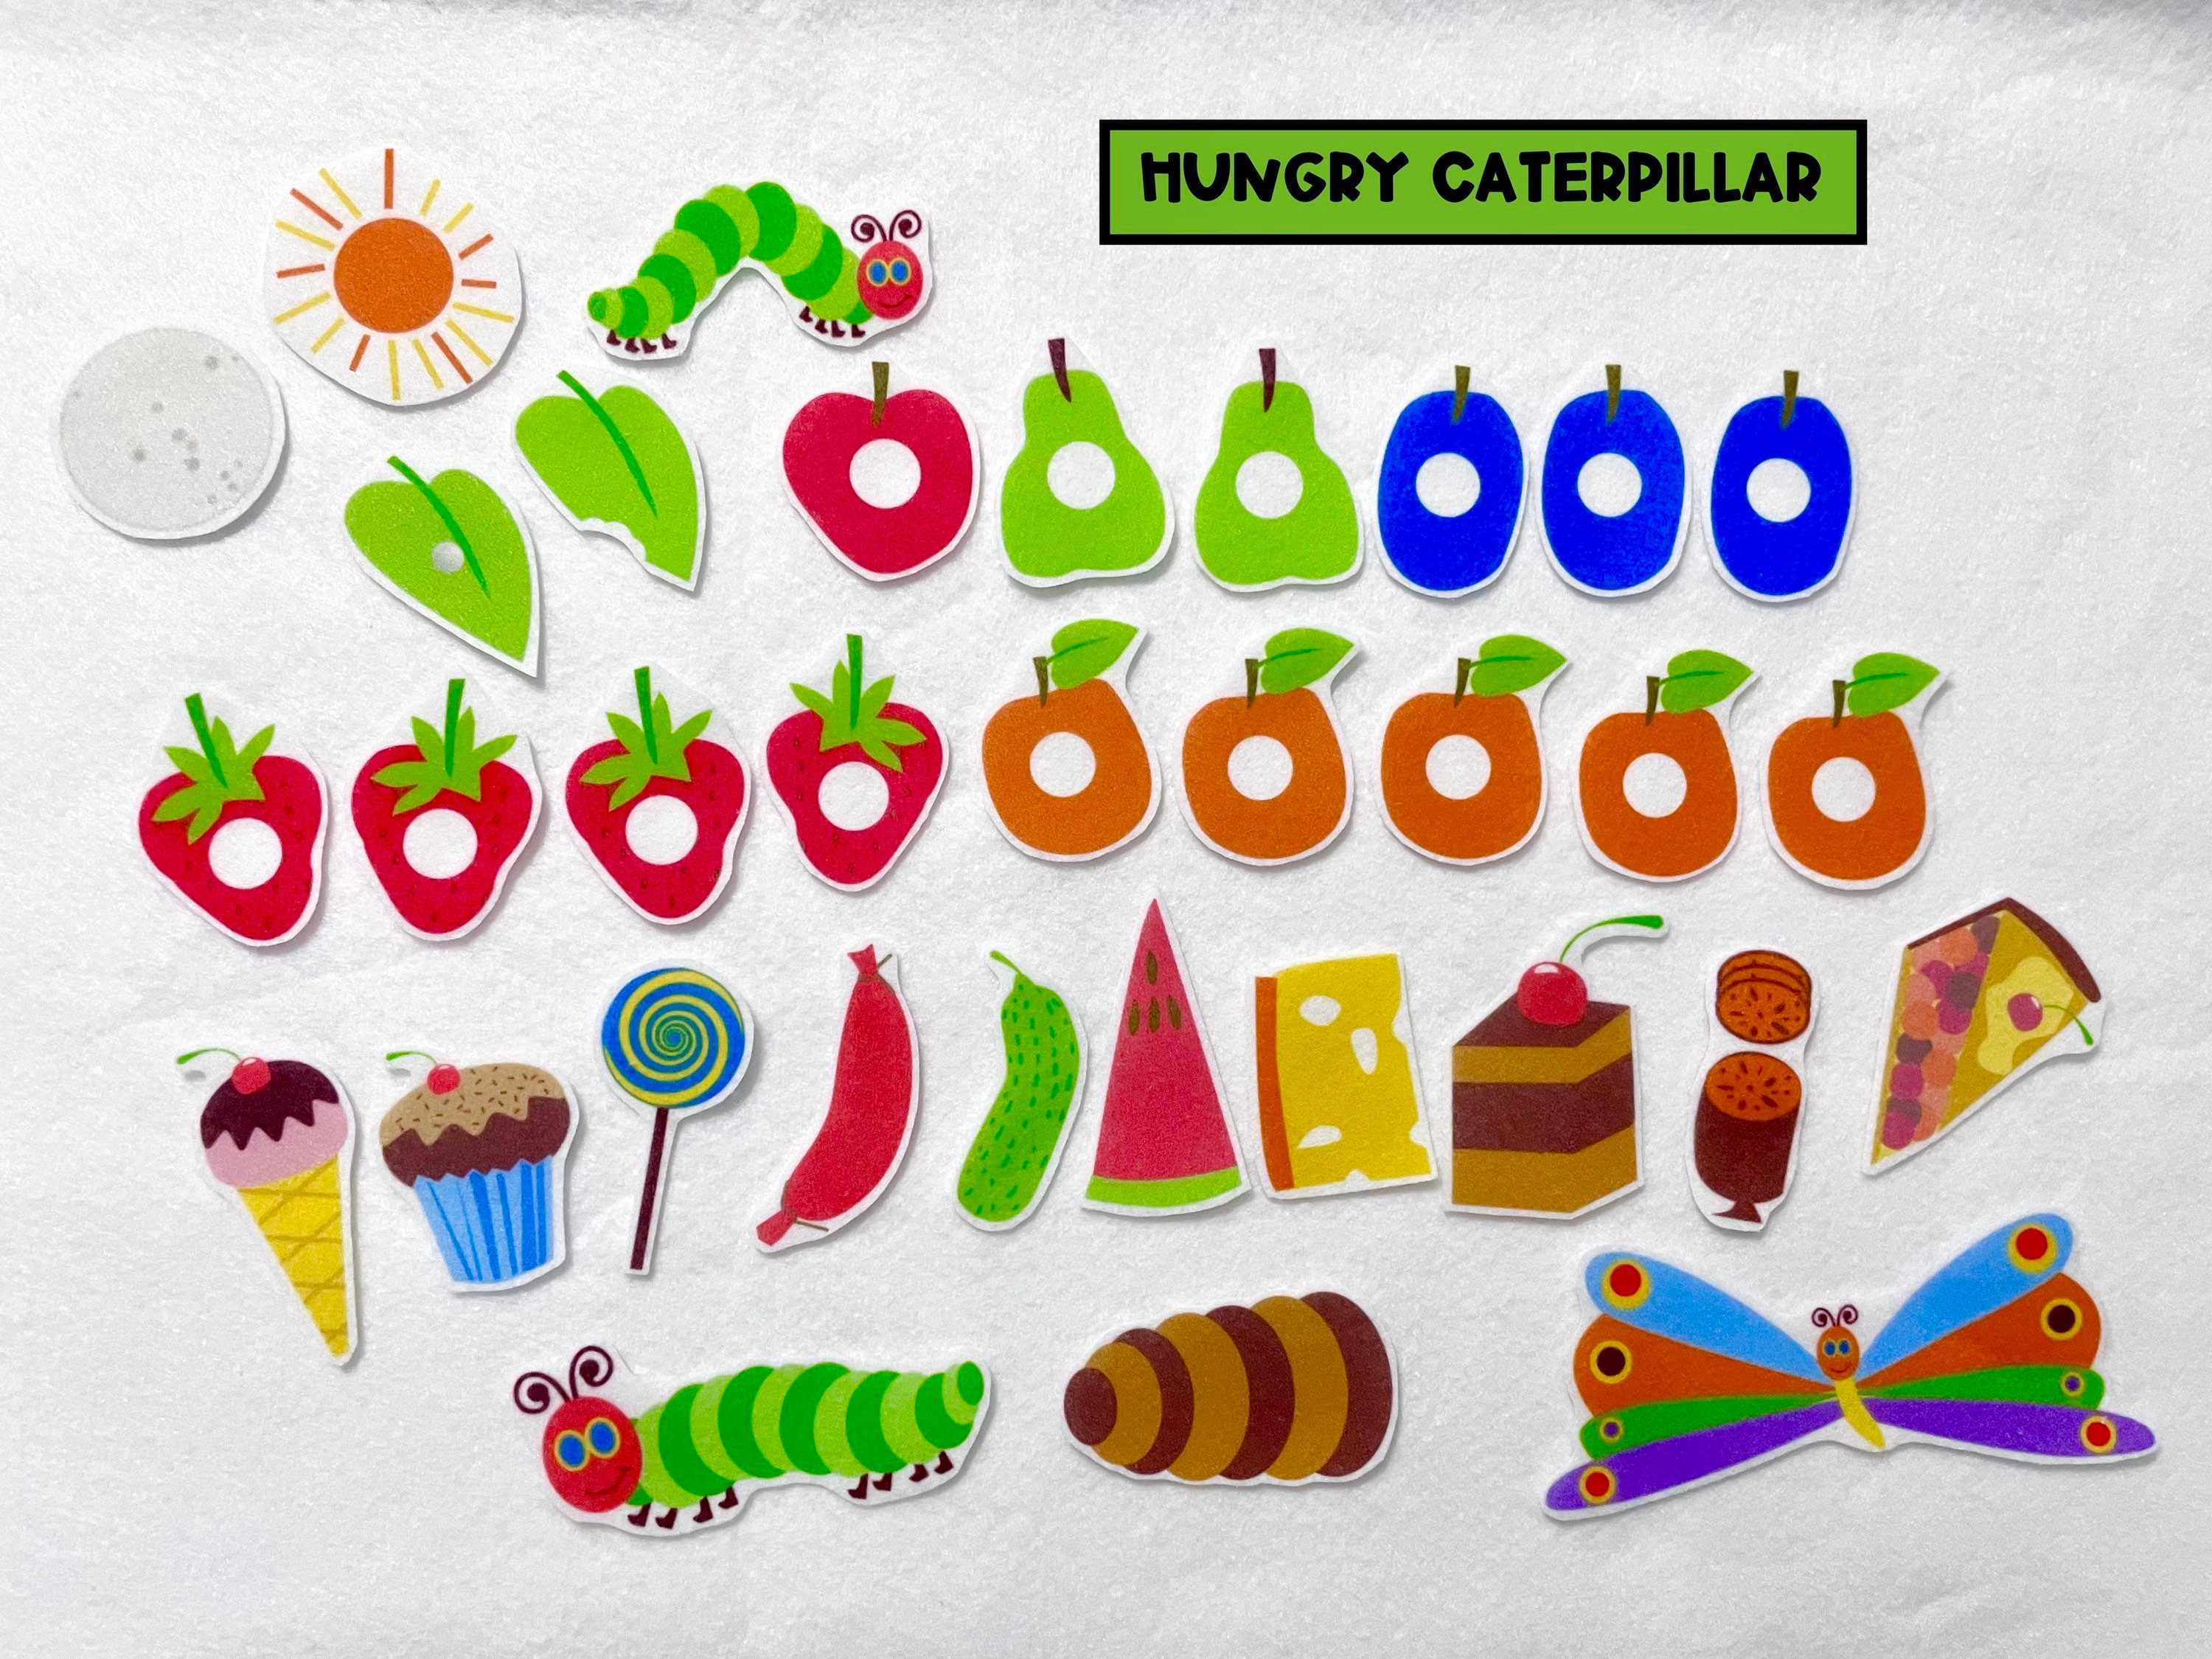 The Very Hungry Caterpillar Felt Flannel Board Kid Story Circle Time preschool 